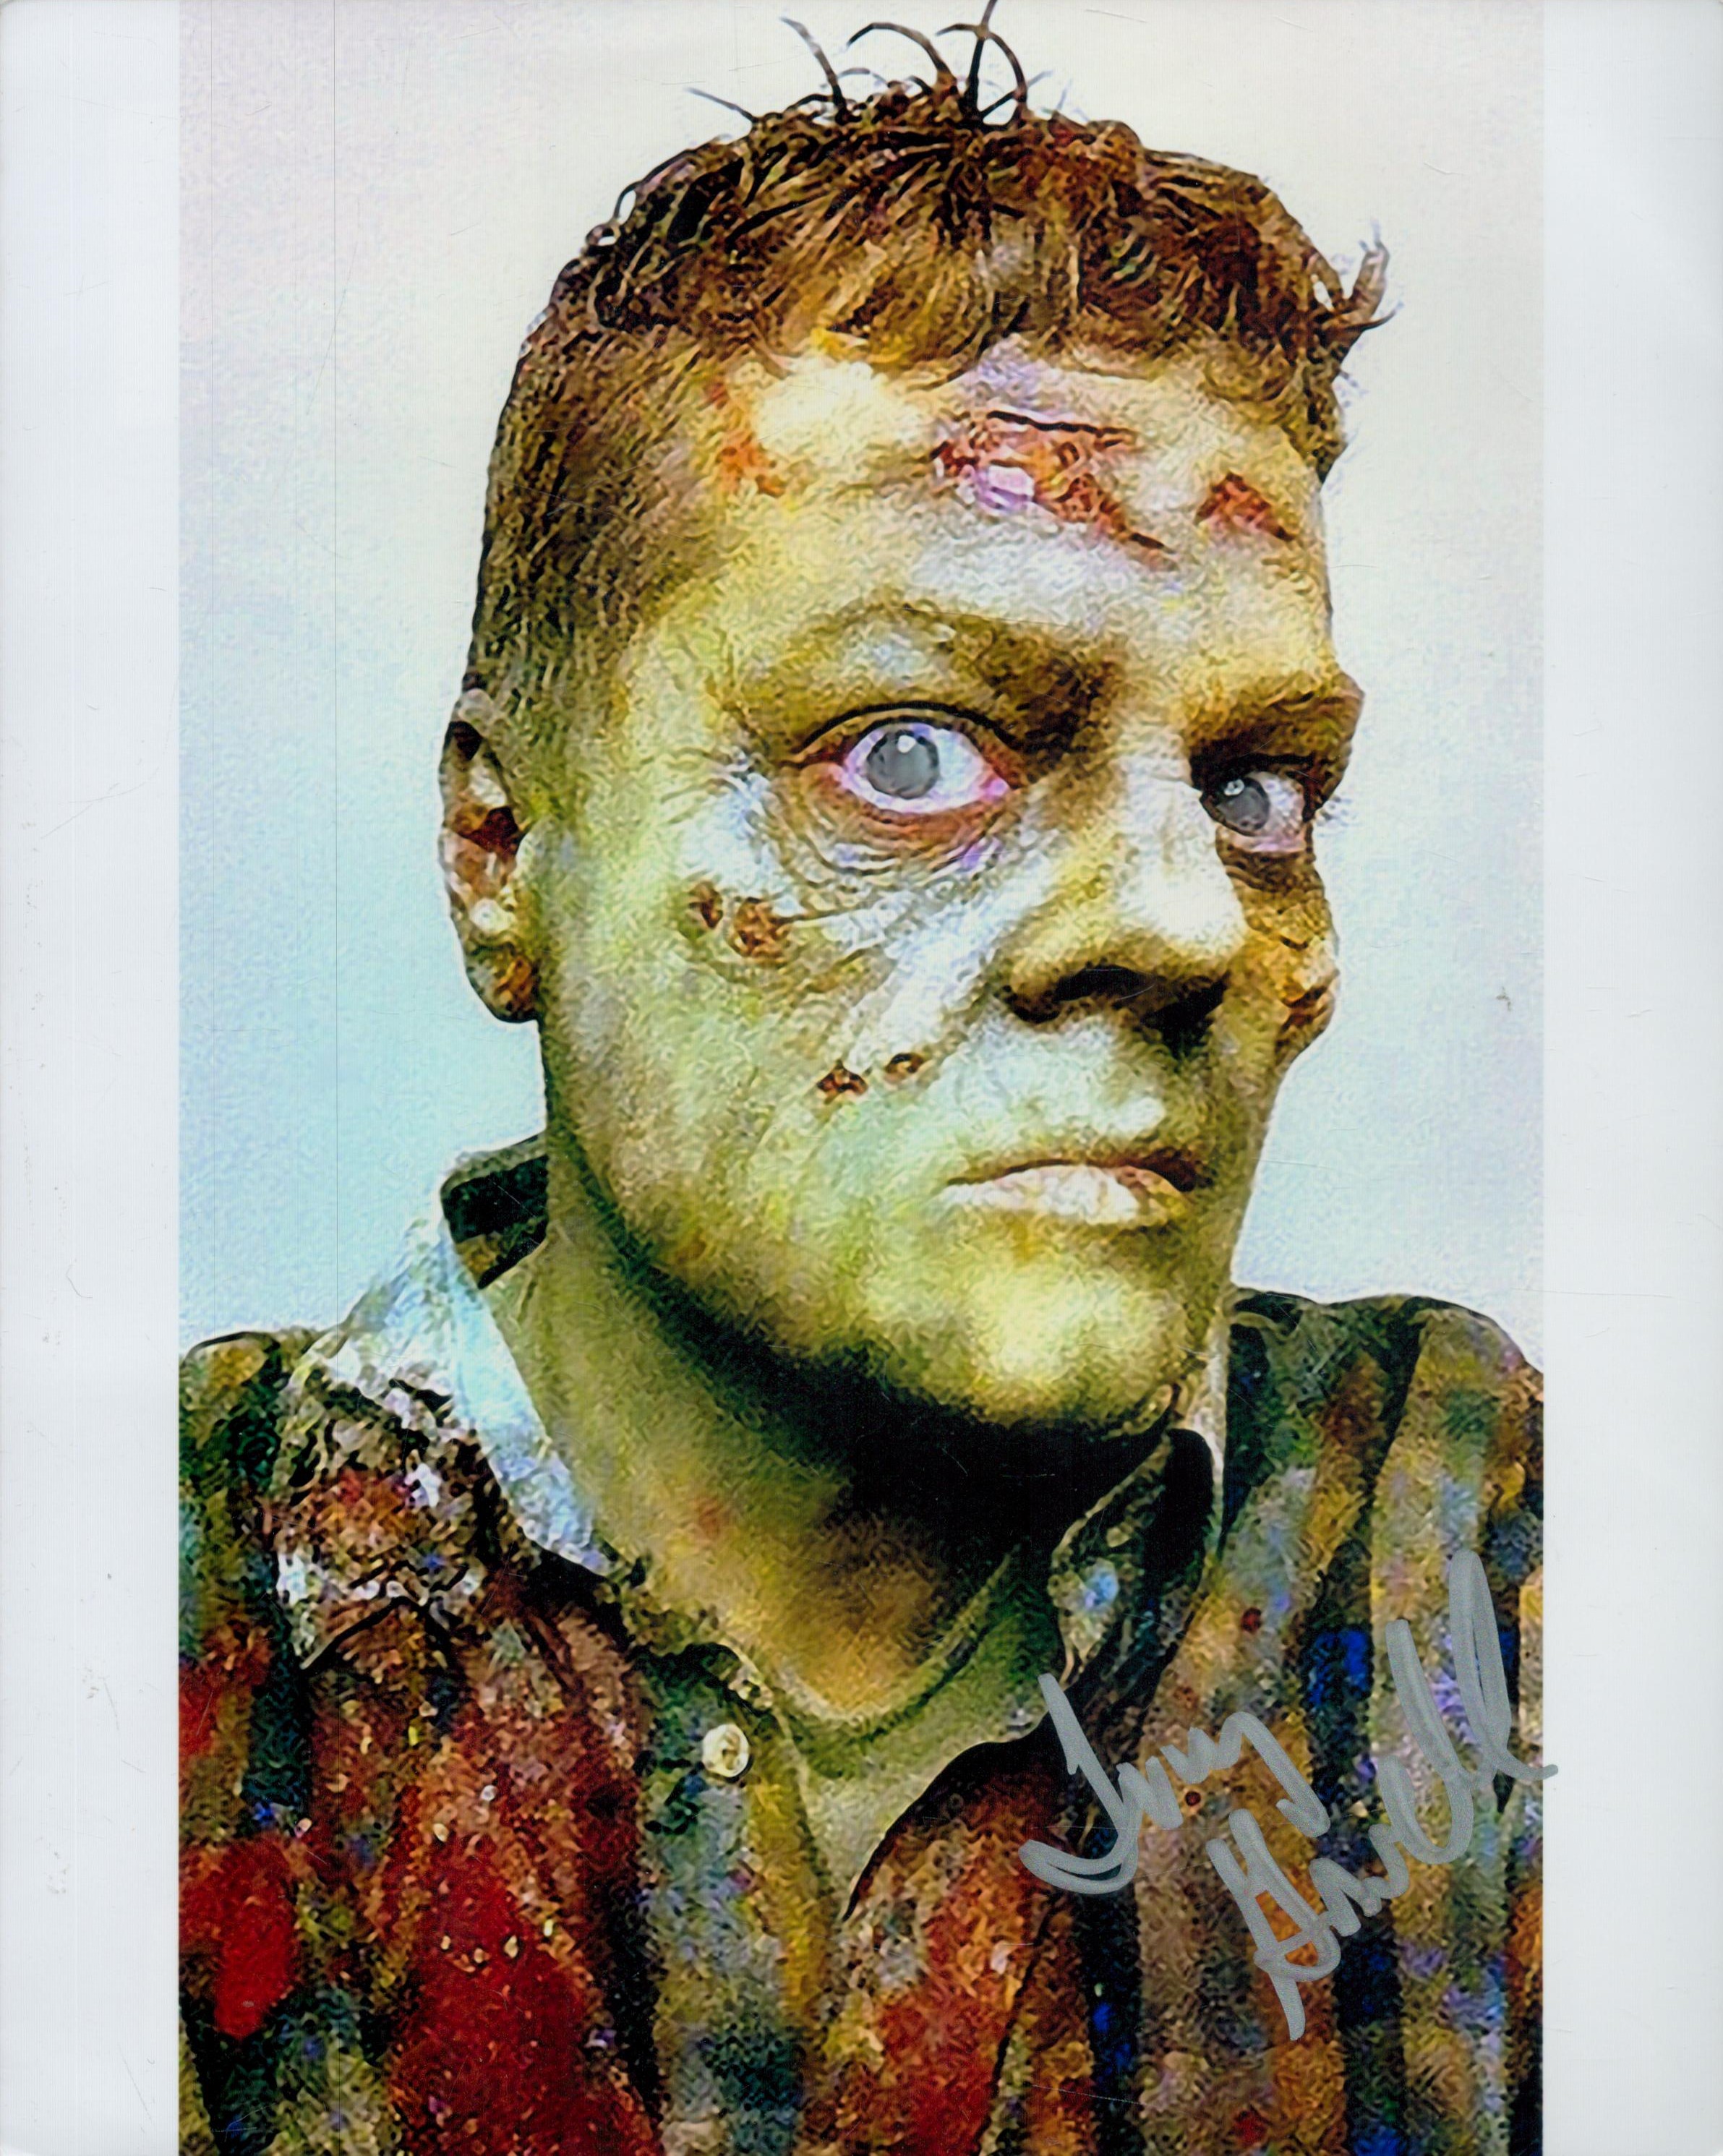 Tony Gowell signed Colour Photo 10x8 Inch. 'Zombie'. Good condition. All autographs are genuine hand